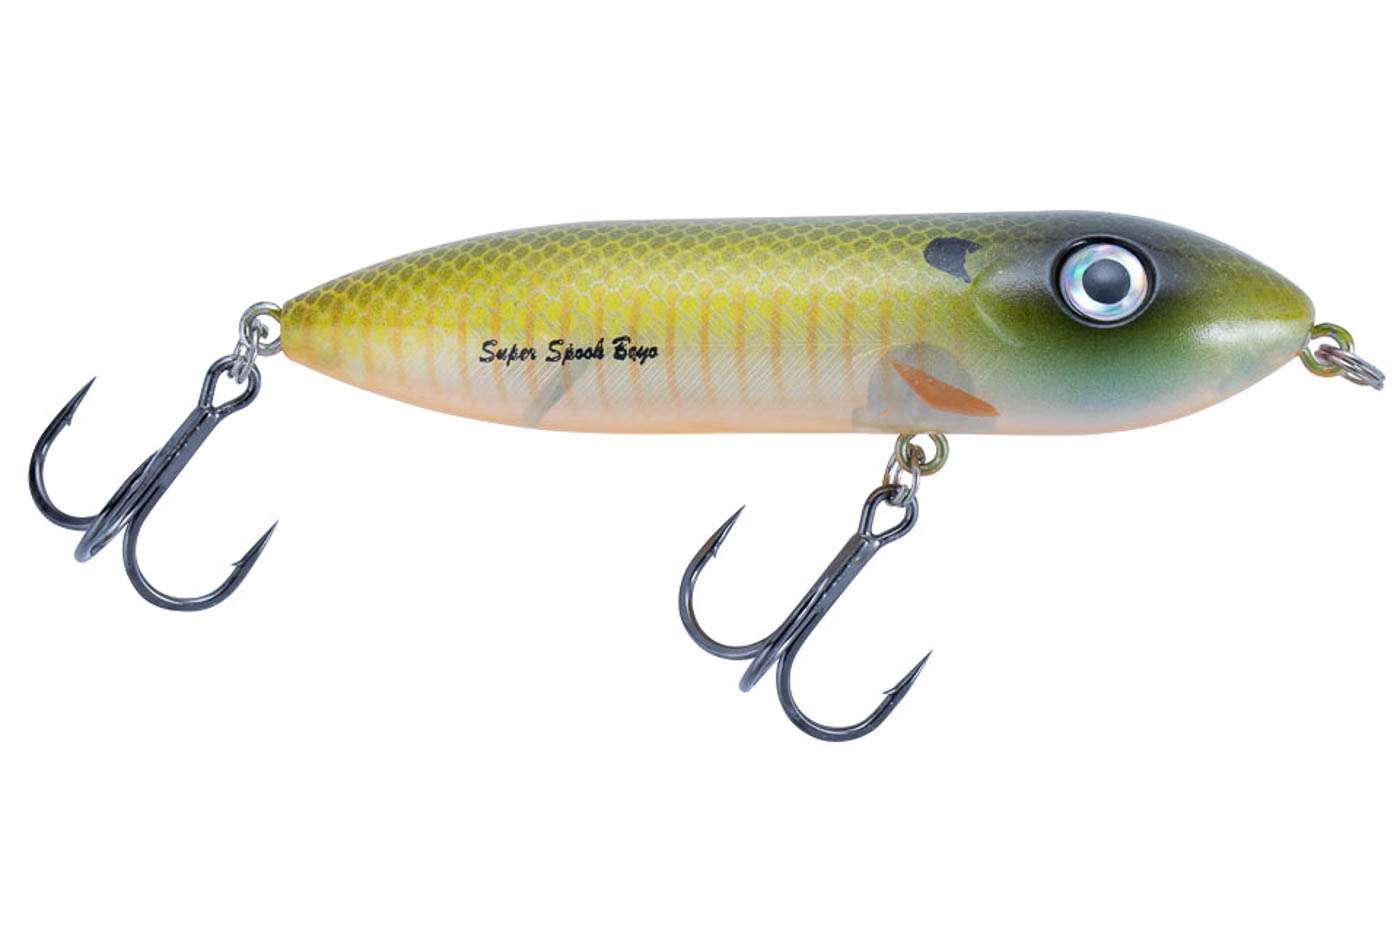 <p><strong>Heddon Super Spook BOYO</strong></p><p>The Heddon Super Spook BOYO is the brainchild of several requests for a smaller Super Spook Jr, and a heavier Zara Puppy. The BOYO measures in at 3 inches long and weighs in at roughly 3/8 ounces, making it very castable. Built with all the same dynamics, the BOYO walks effortlessly just like all the other lures in the Super Spook lineup. <a href=